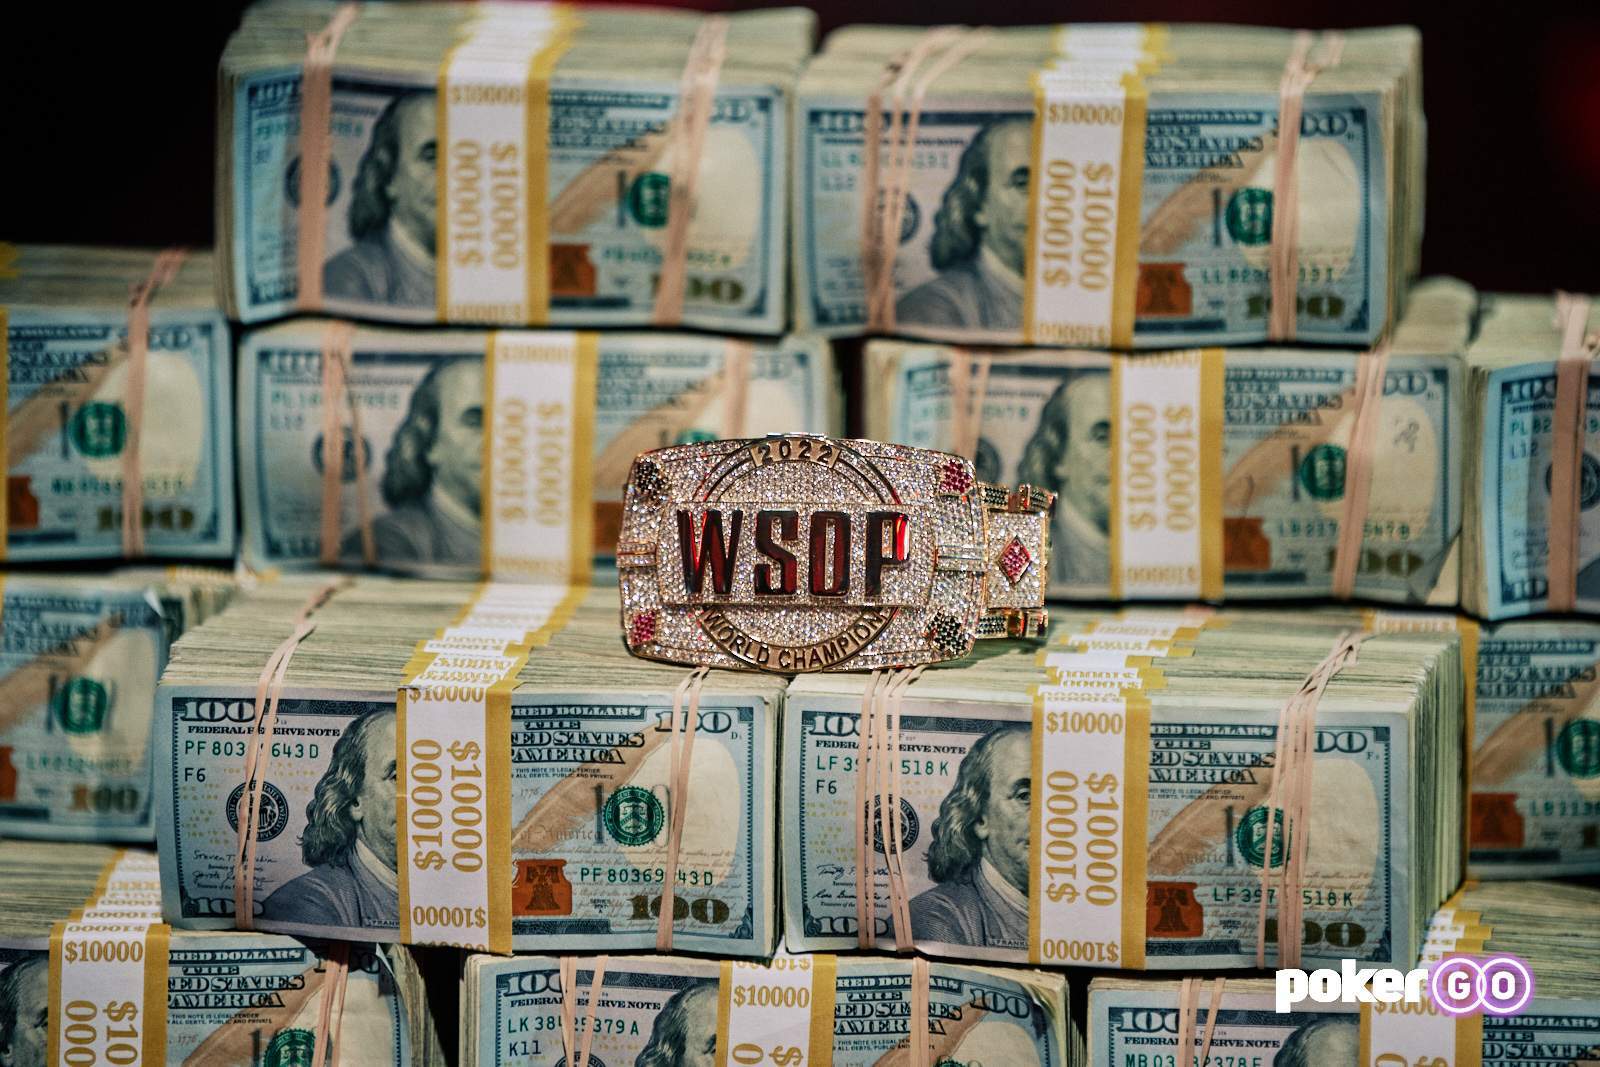 WSOP Day 45 Recap: Three Bracelets Won, Colpoys Leads from Holz, Chidwick and Rast in $50k High Roller